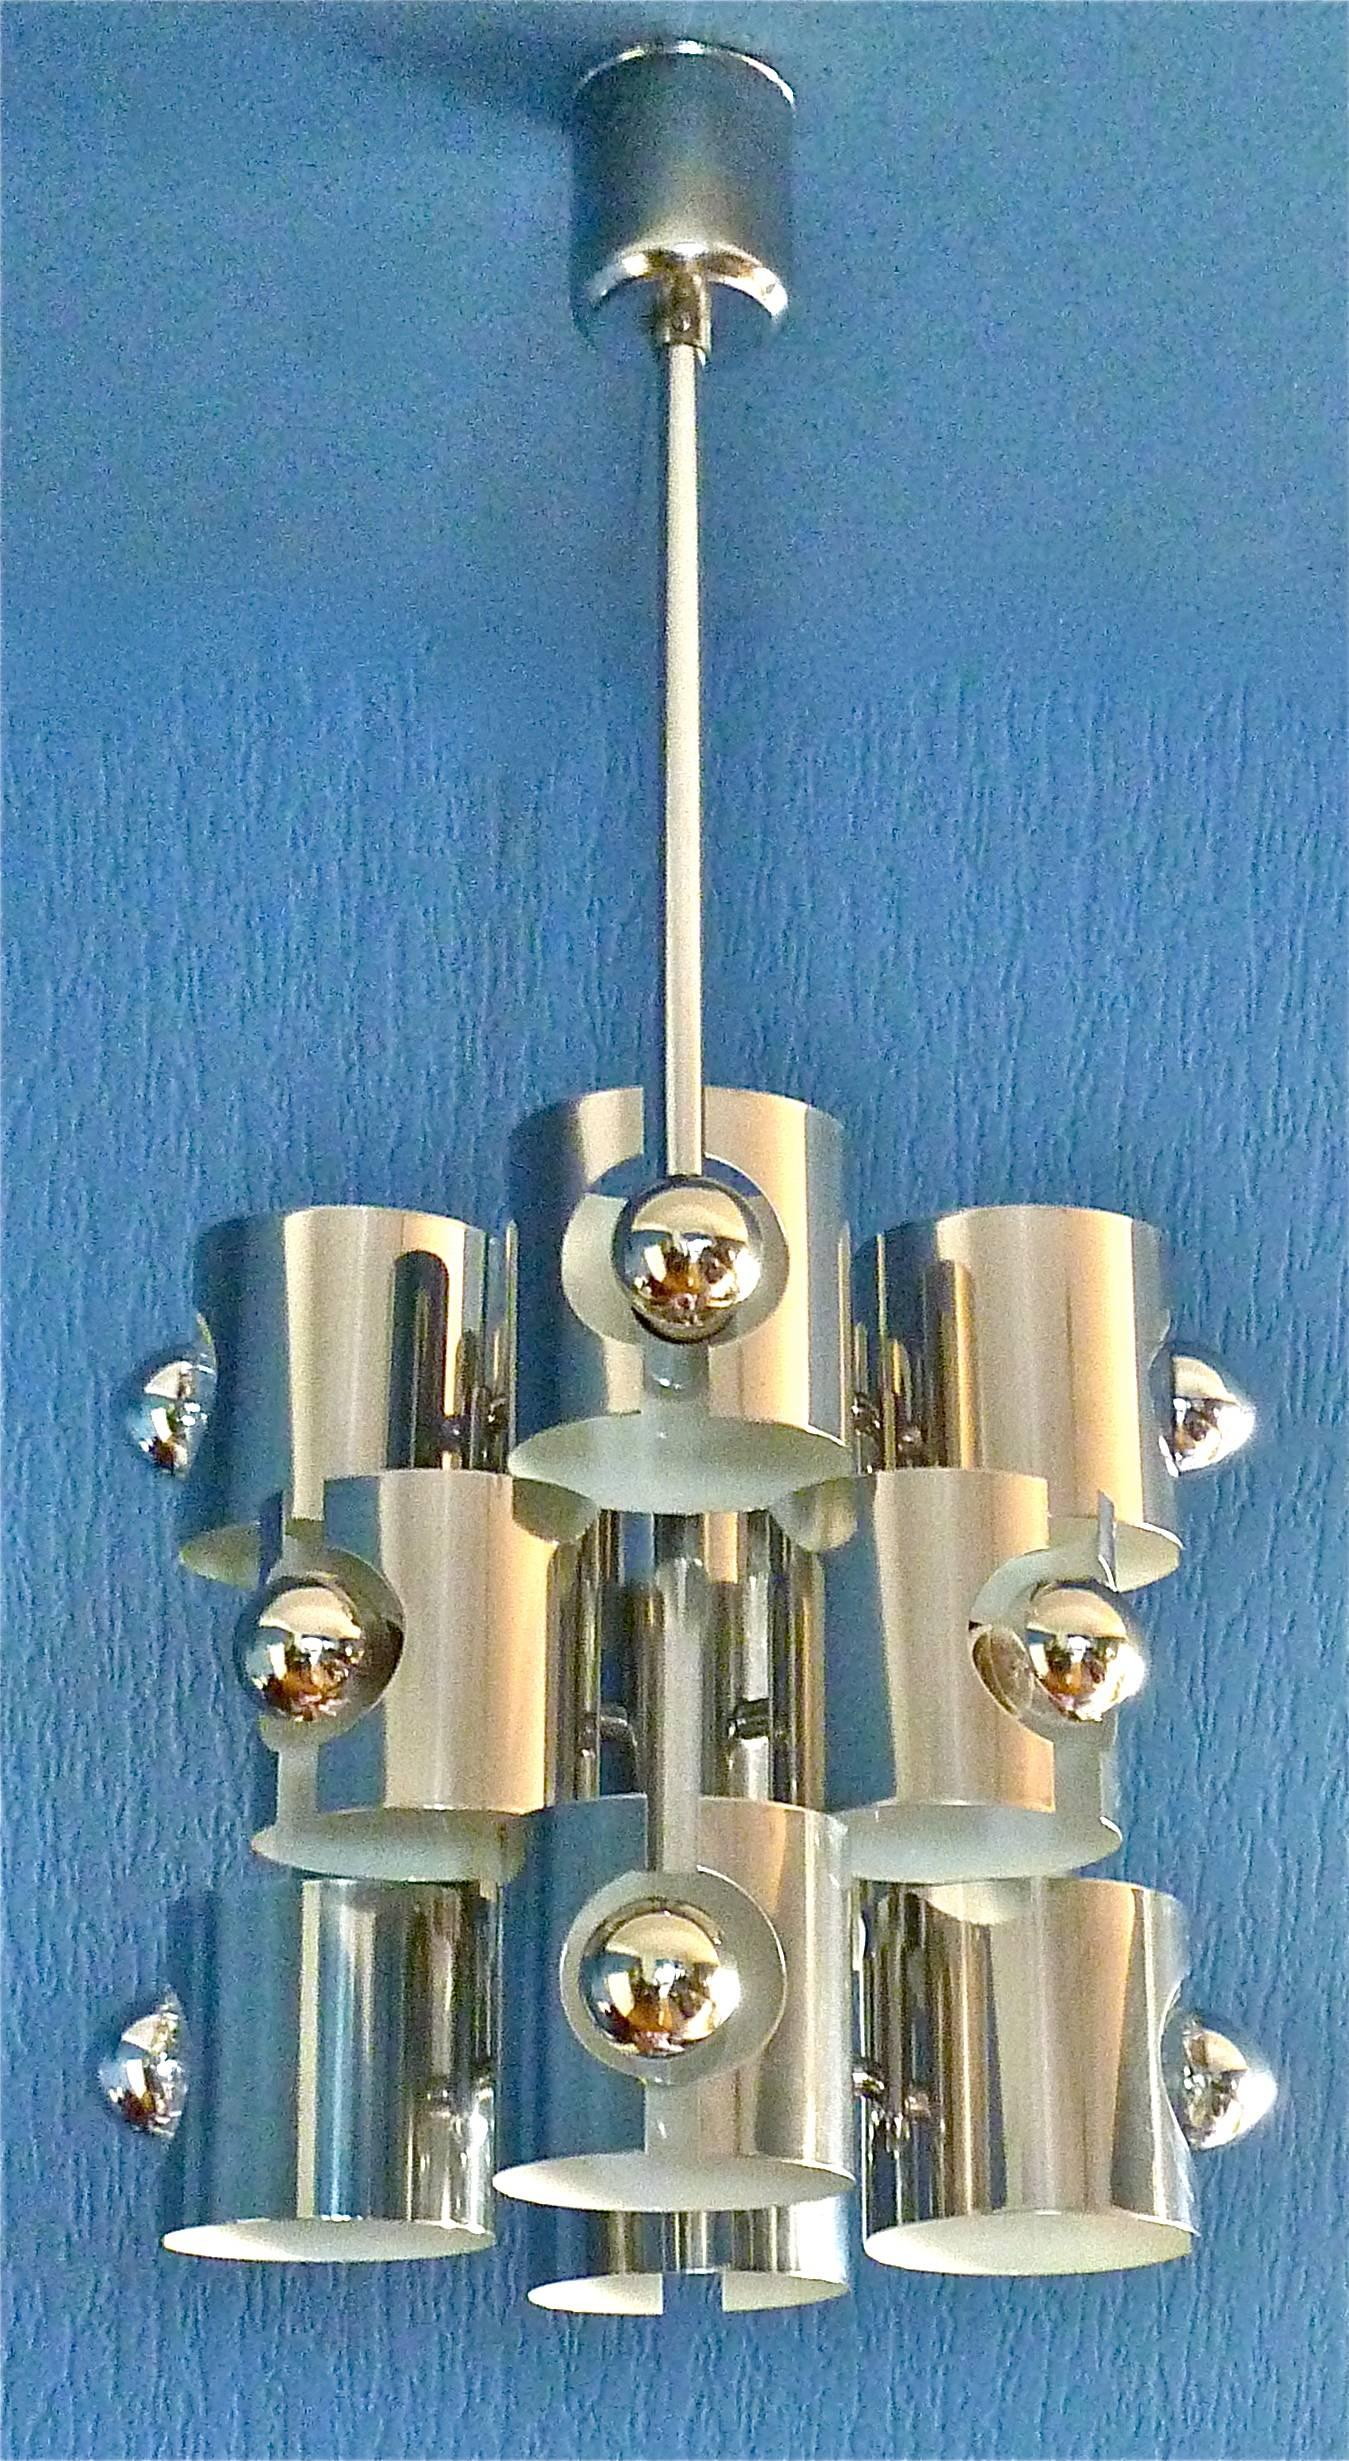 Awesome Space Age Op Art Pop Art chandelier designed by Gaetano Sciolari and executed by Sciolari, Italy, circa 1960-70. The ceiling fixture and the frame are made of chromed brass and white lacquered enameled metal. The gorgeous chandelier has a